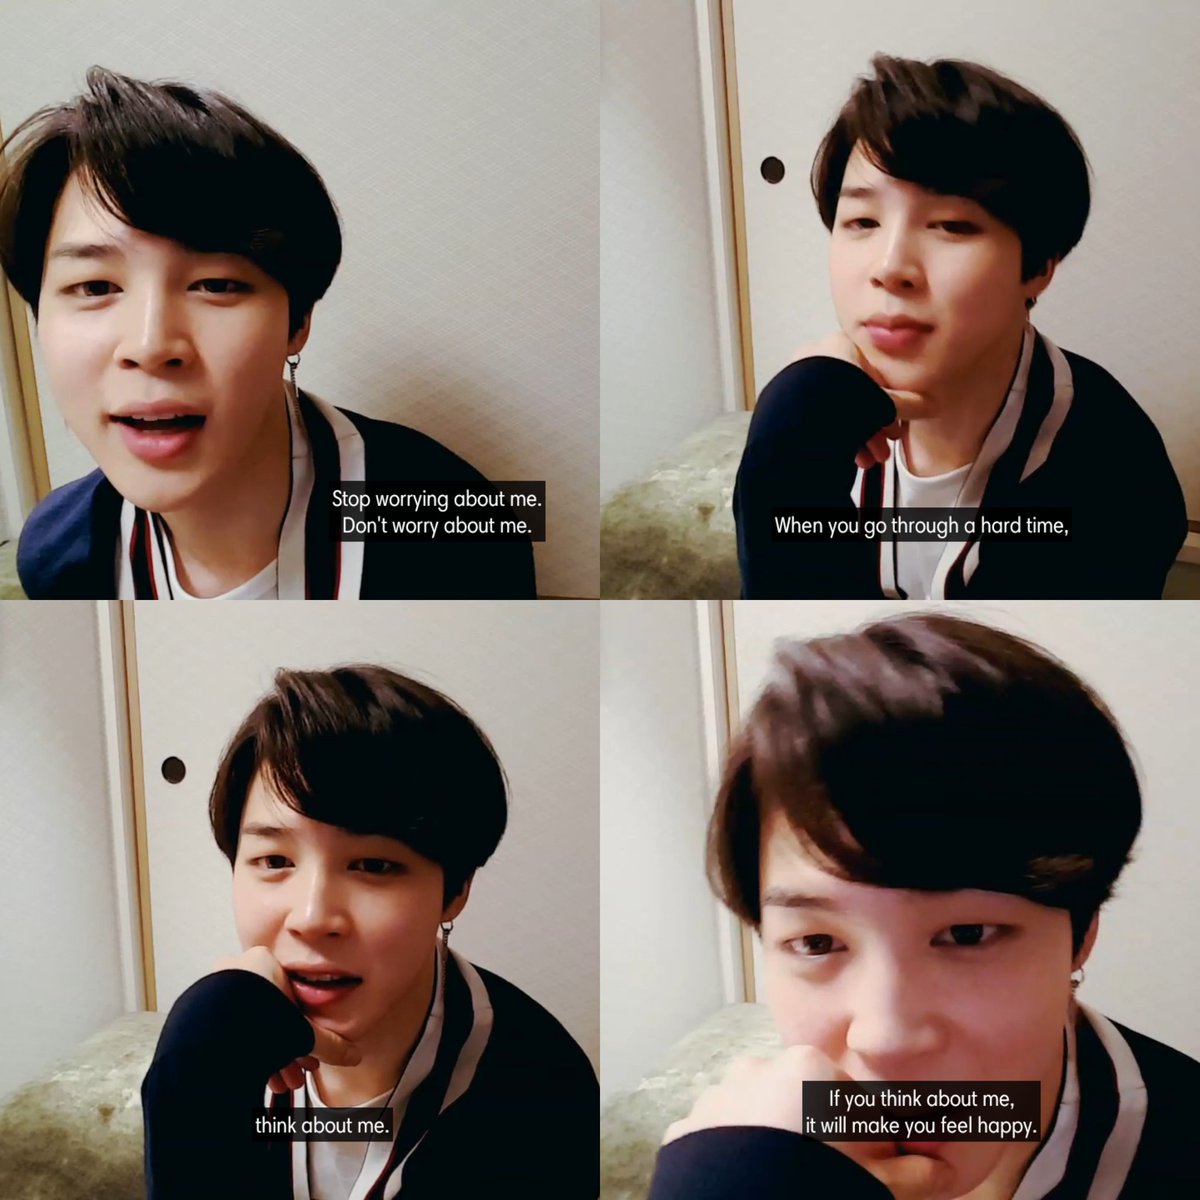 To all those questions, Jimin replied,"Don't worry about me, worry about yourselves too. If you're having a hard time, think of me. You'll become happy when you think of me." In fact, he even did a 40 mins live for his absence in Graham Norton Show. ++